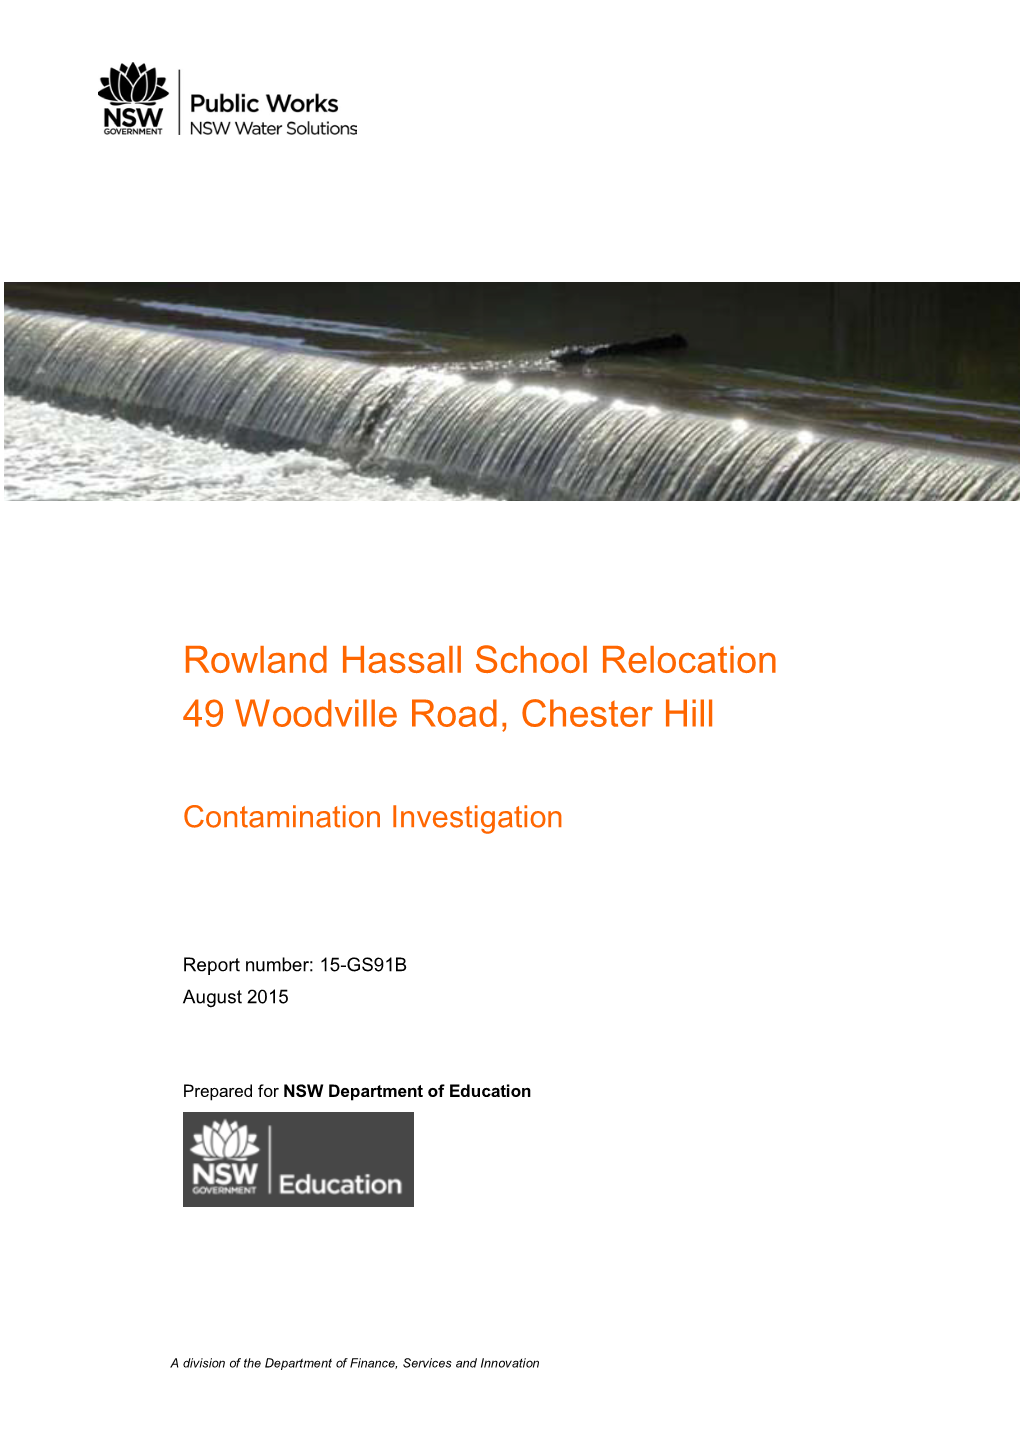 Rowland Hassall School Relocation 49 Woodville Road, Chester Hill